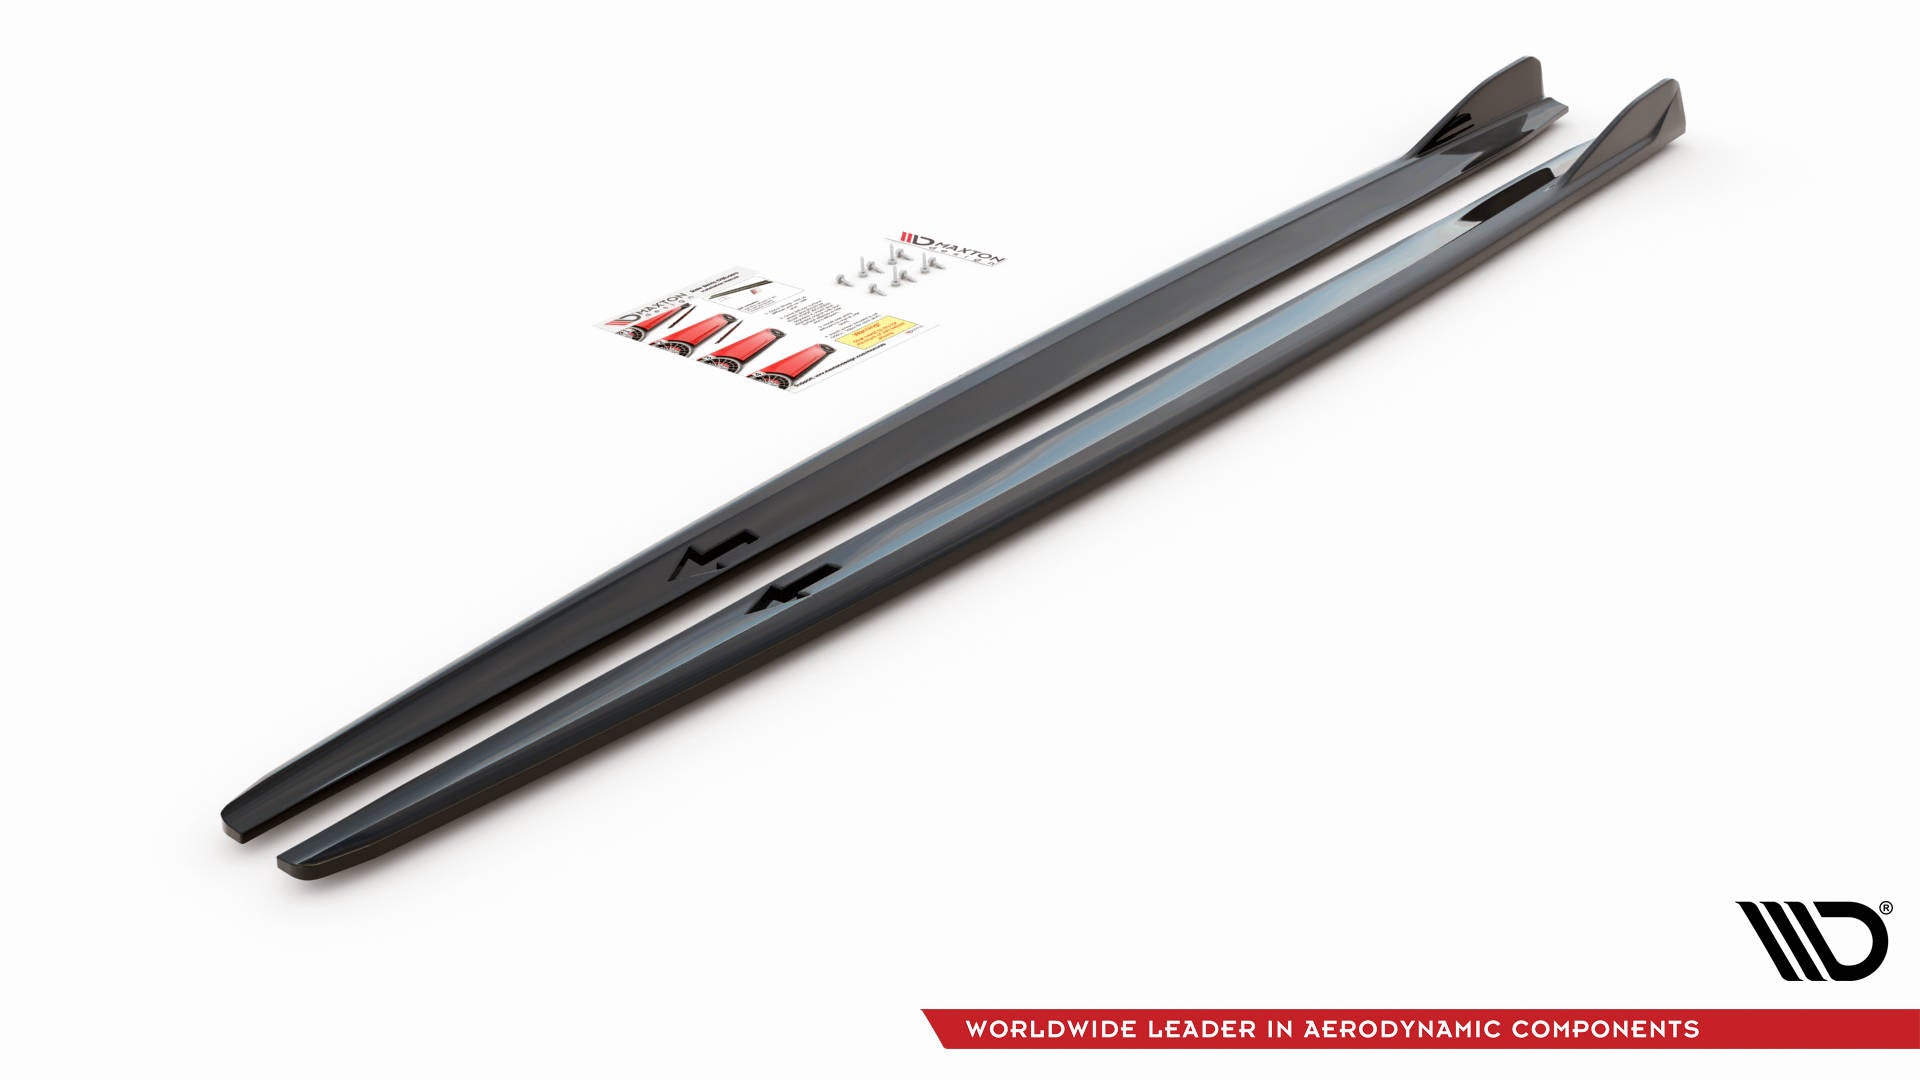 Side Skirts Diffusers V.2 BMW 2 Gran Coupe M-Pack / M235i F44